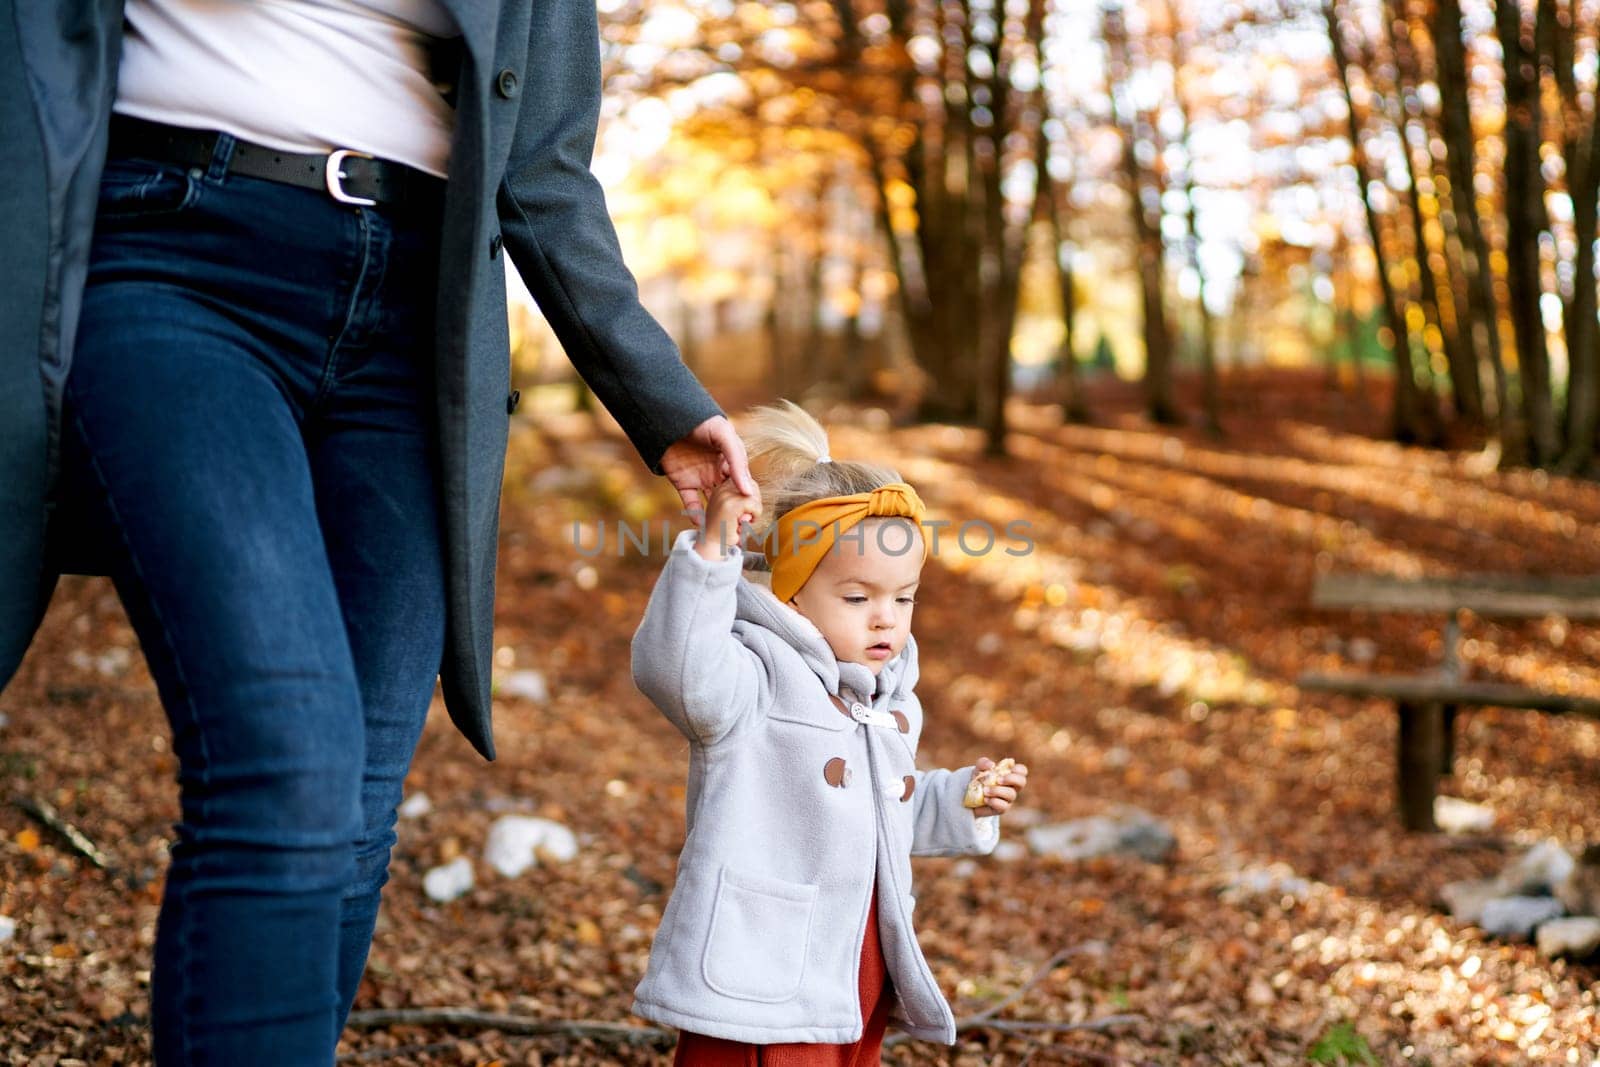 Mom leads a little girl through the park, holding her hand. Cropped by Nadtochiy